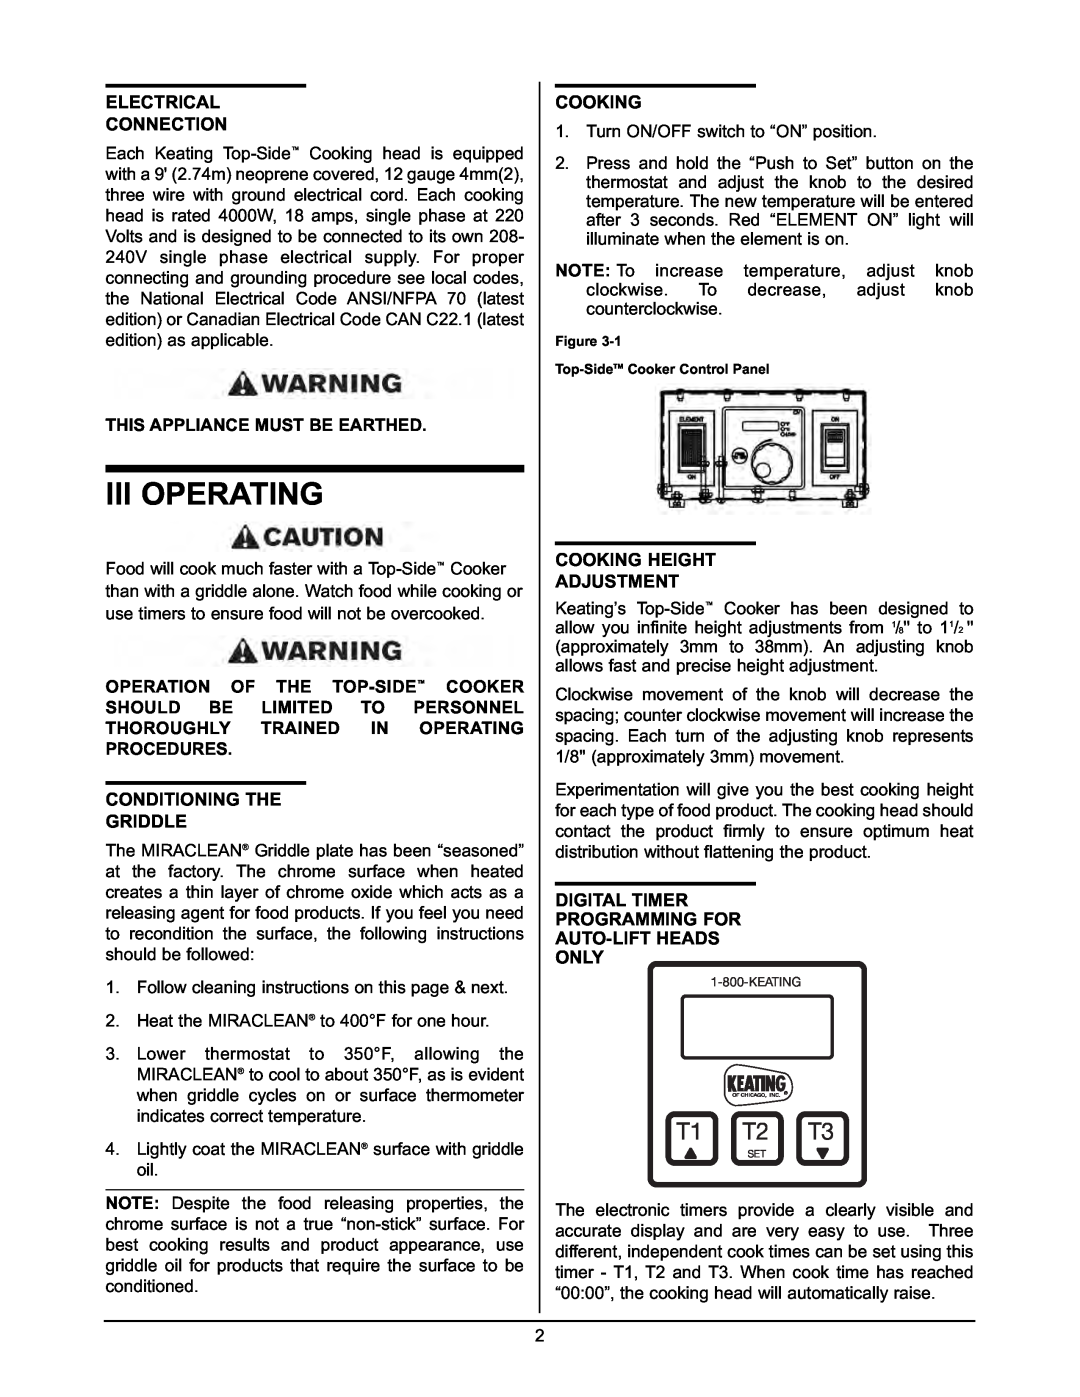 Keating Of Chicago 2005 user manual Iii Operating, T1 T2 T3, Electrical Connection, Conditioning The Griddle, Cooking 